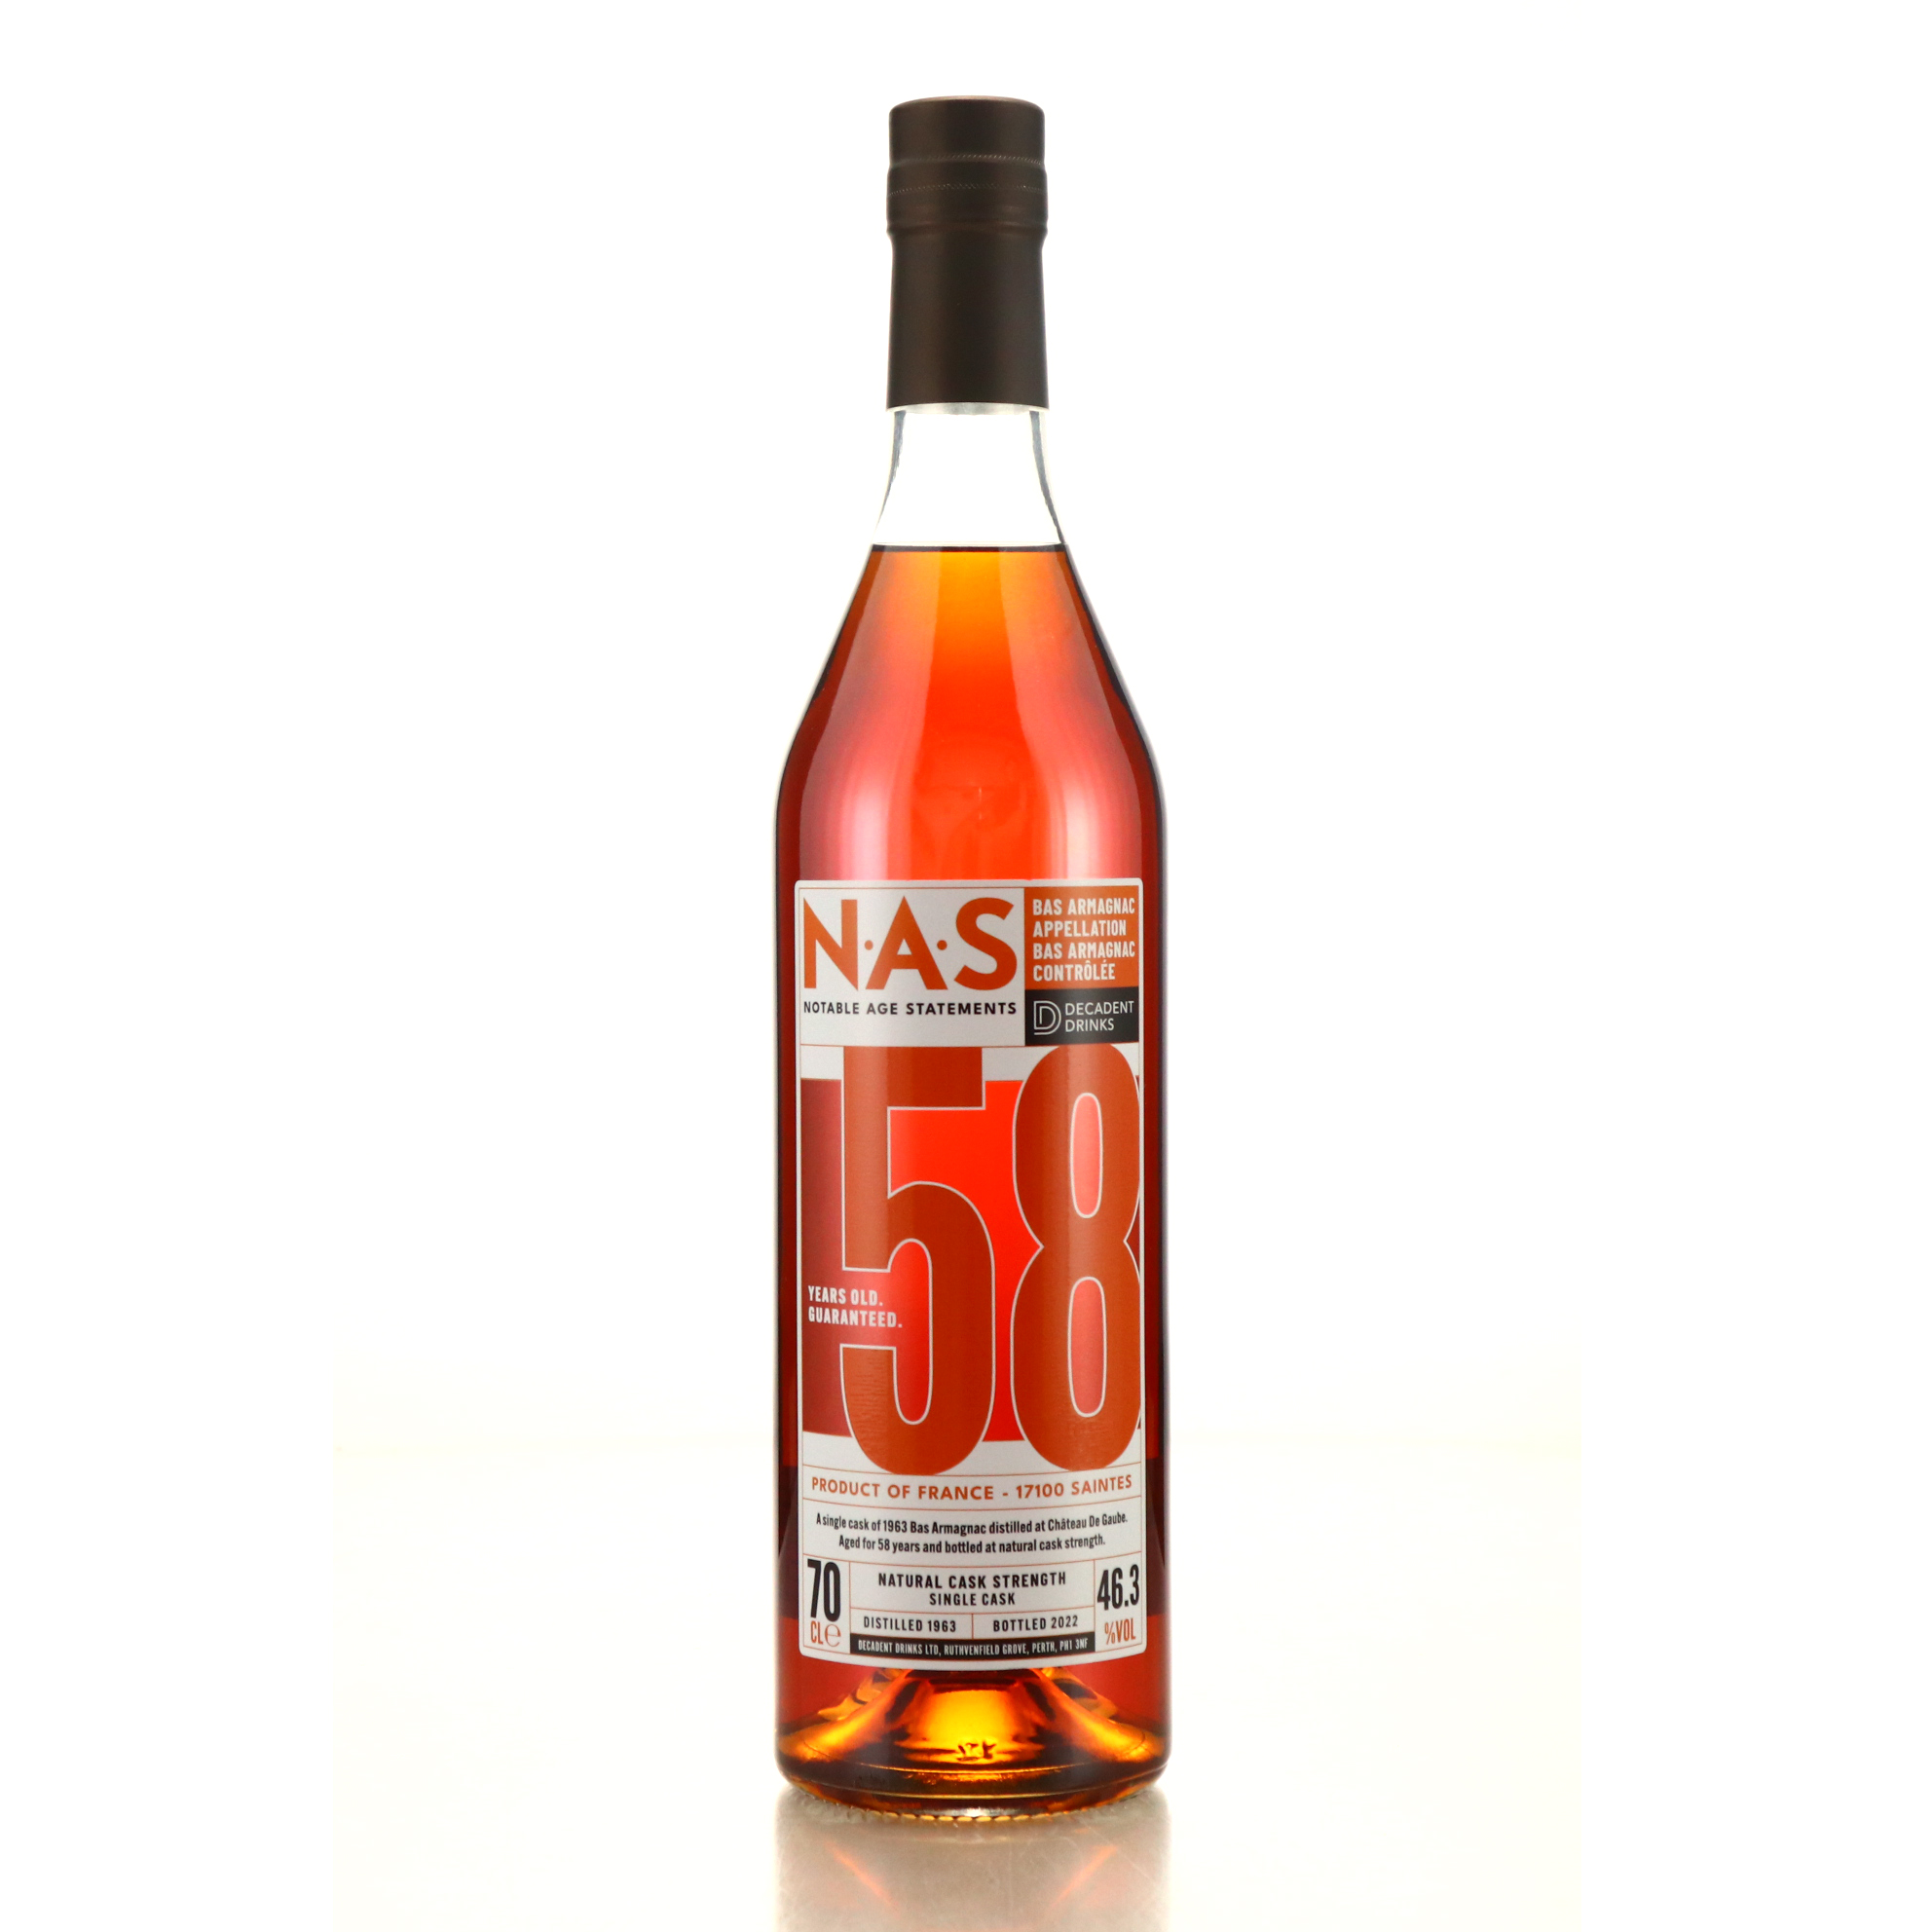 NAS 3 58 Year Old Armagnac - Front